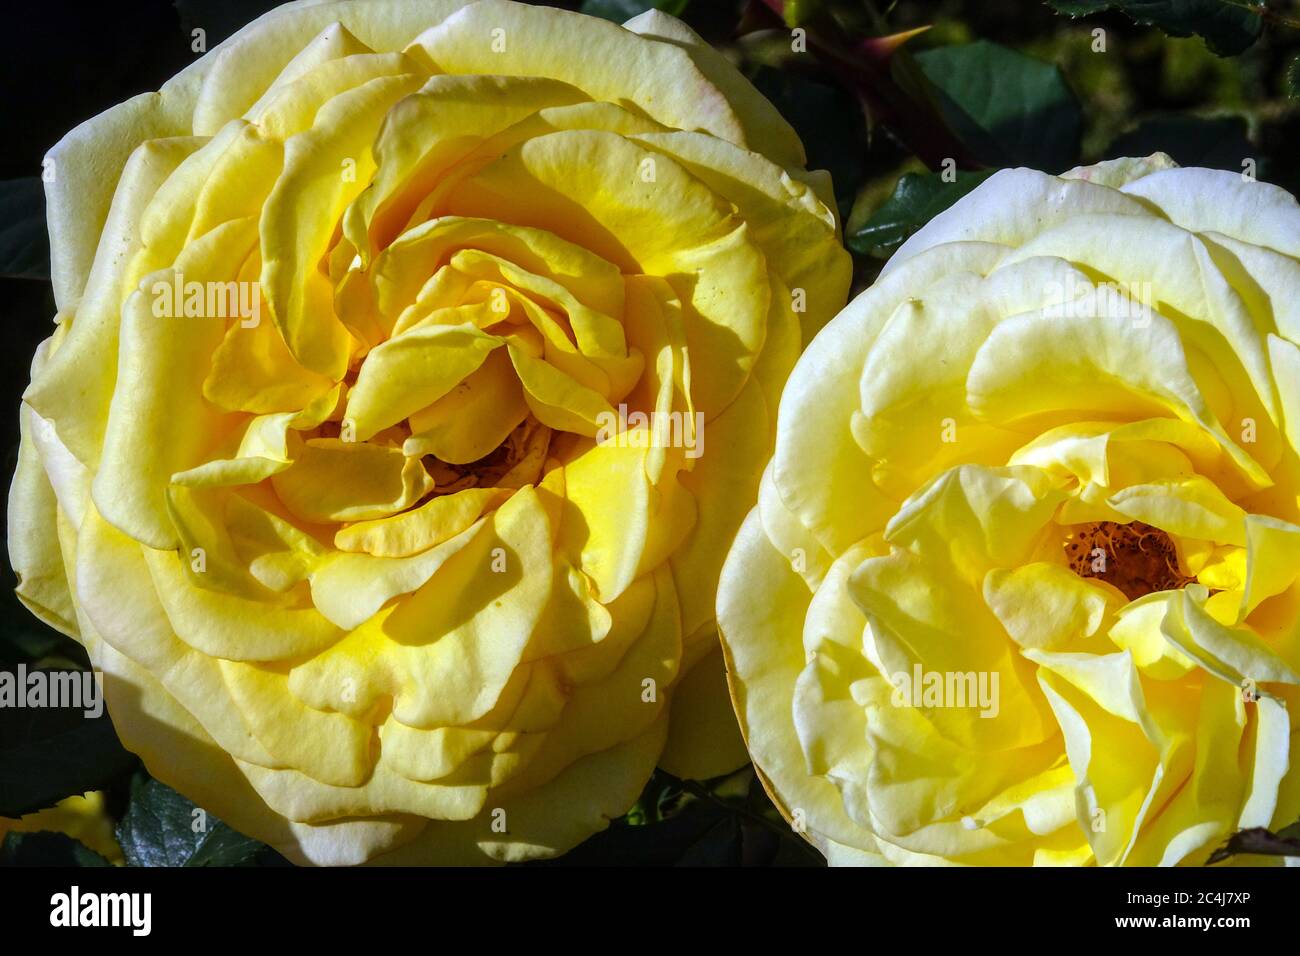 Yellow Rose Rosa Ecrins Large blooms Stock Photo